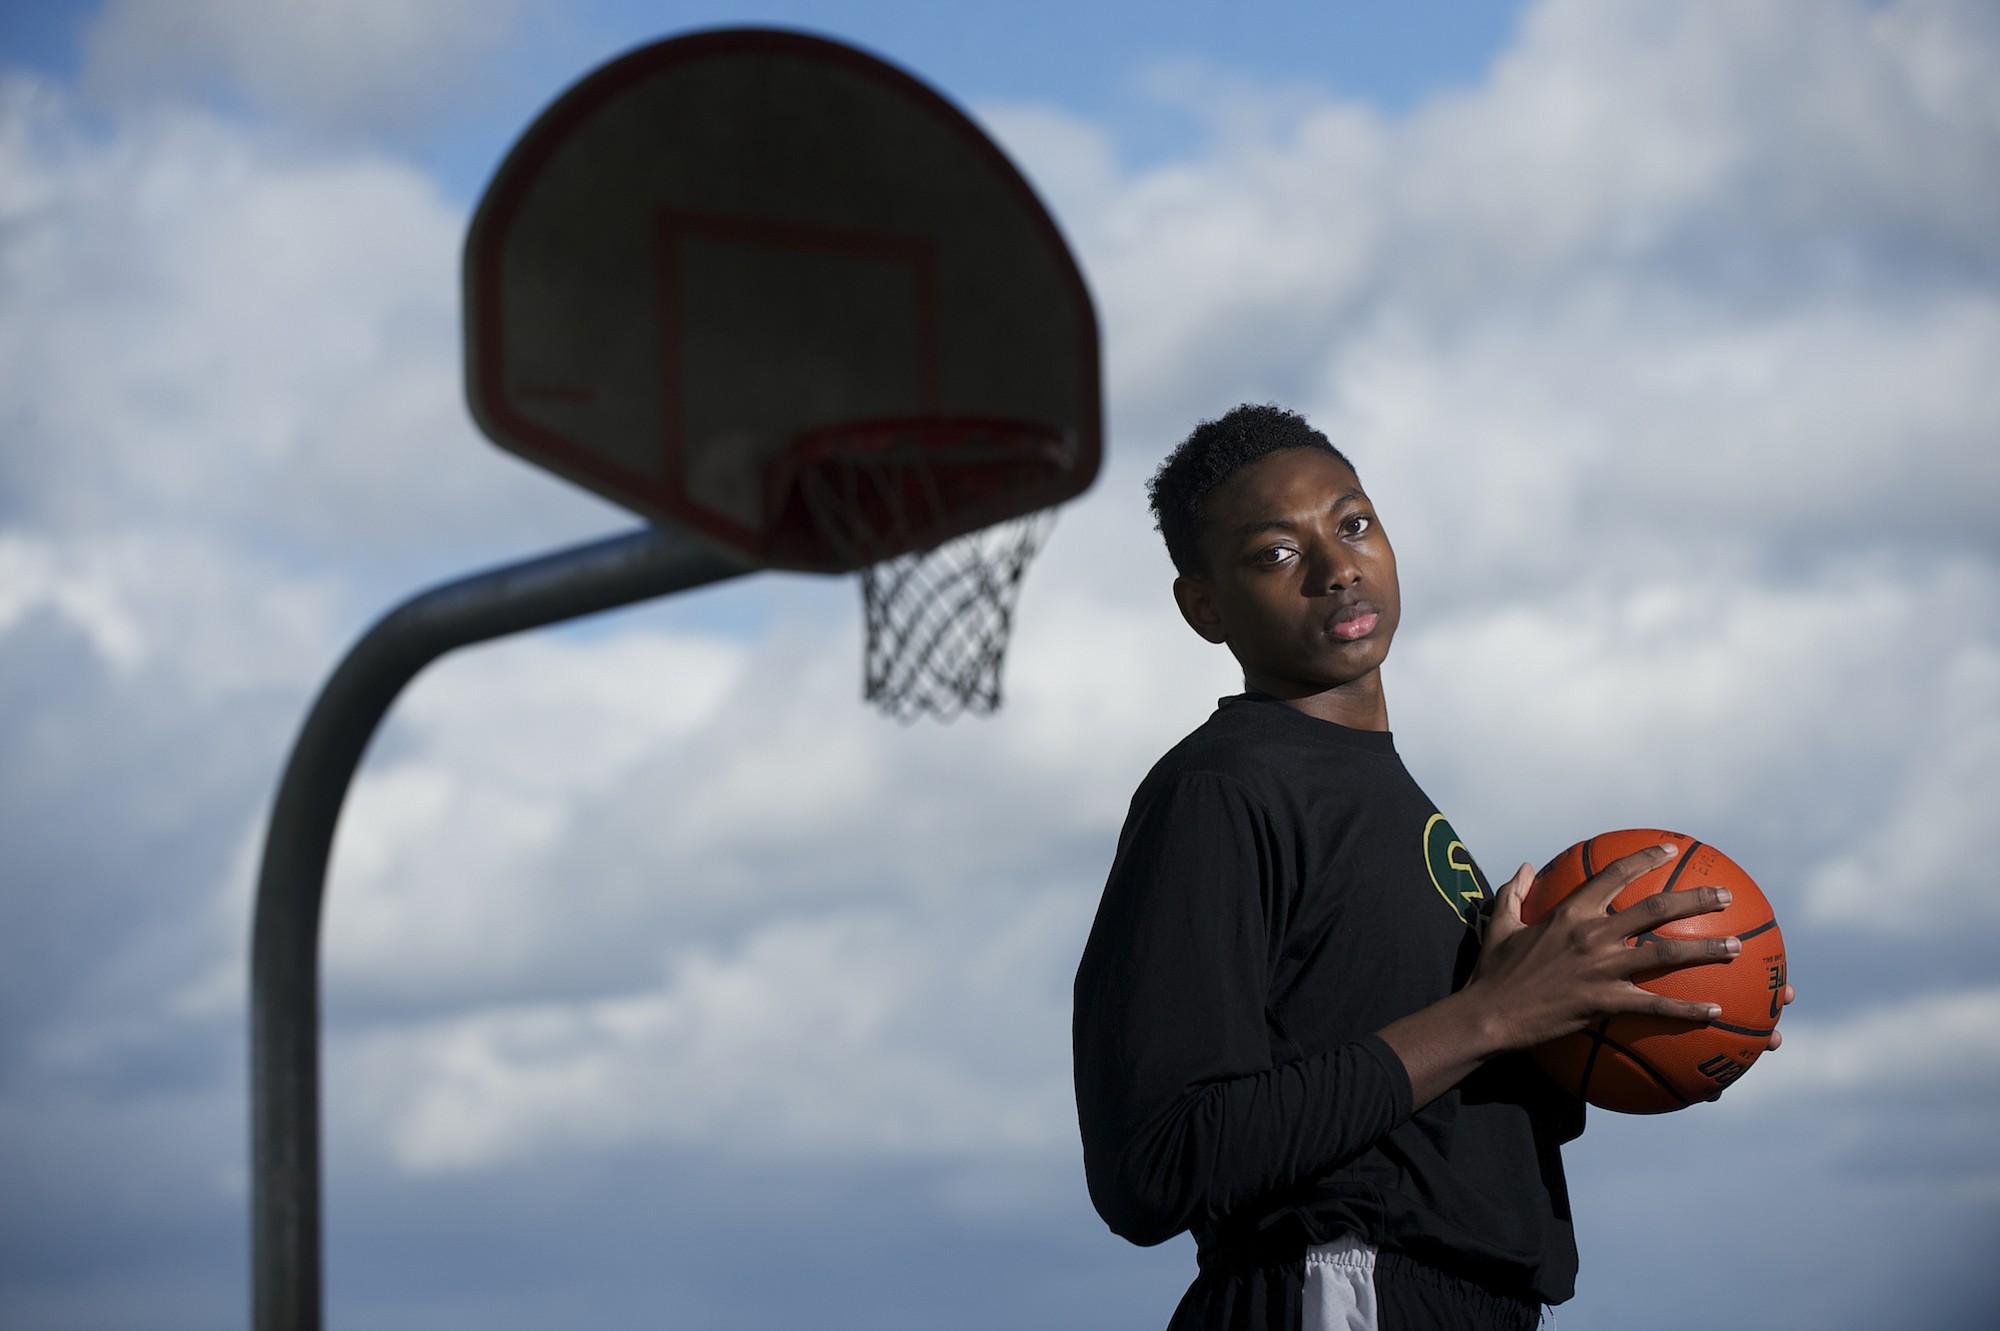 Evergreen High School's Robert Franks, The Columbian's All-Region boys basketball player for 2013-14, has committed to play college basketball at Washington State.